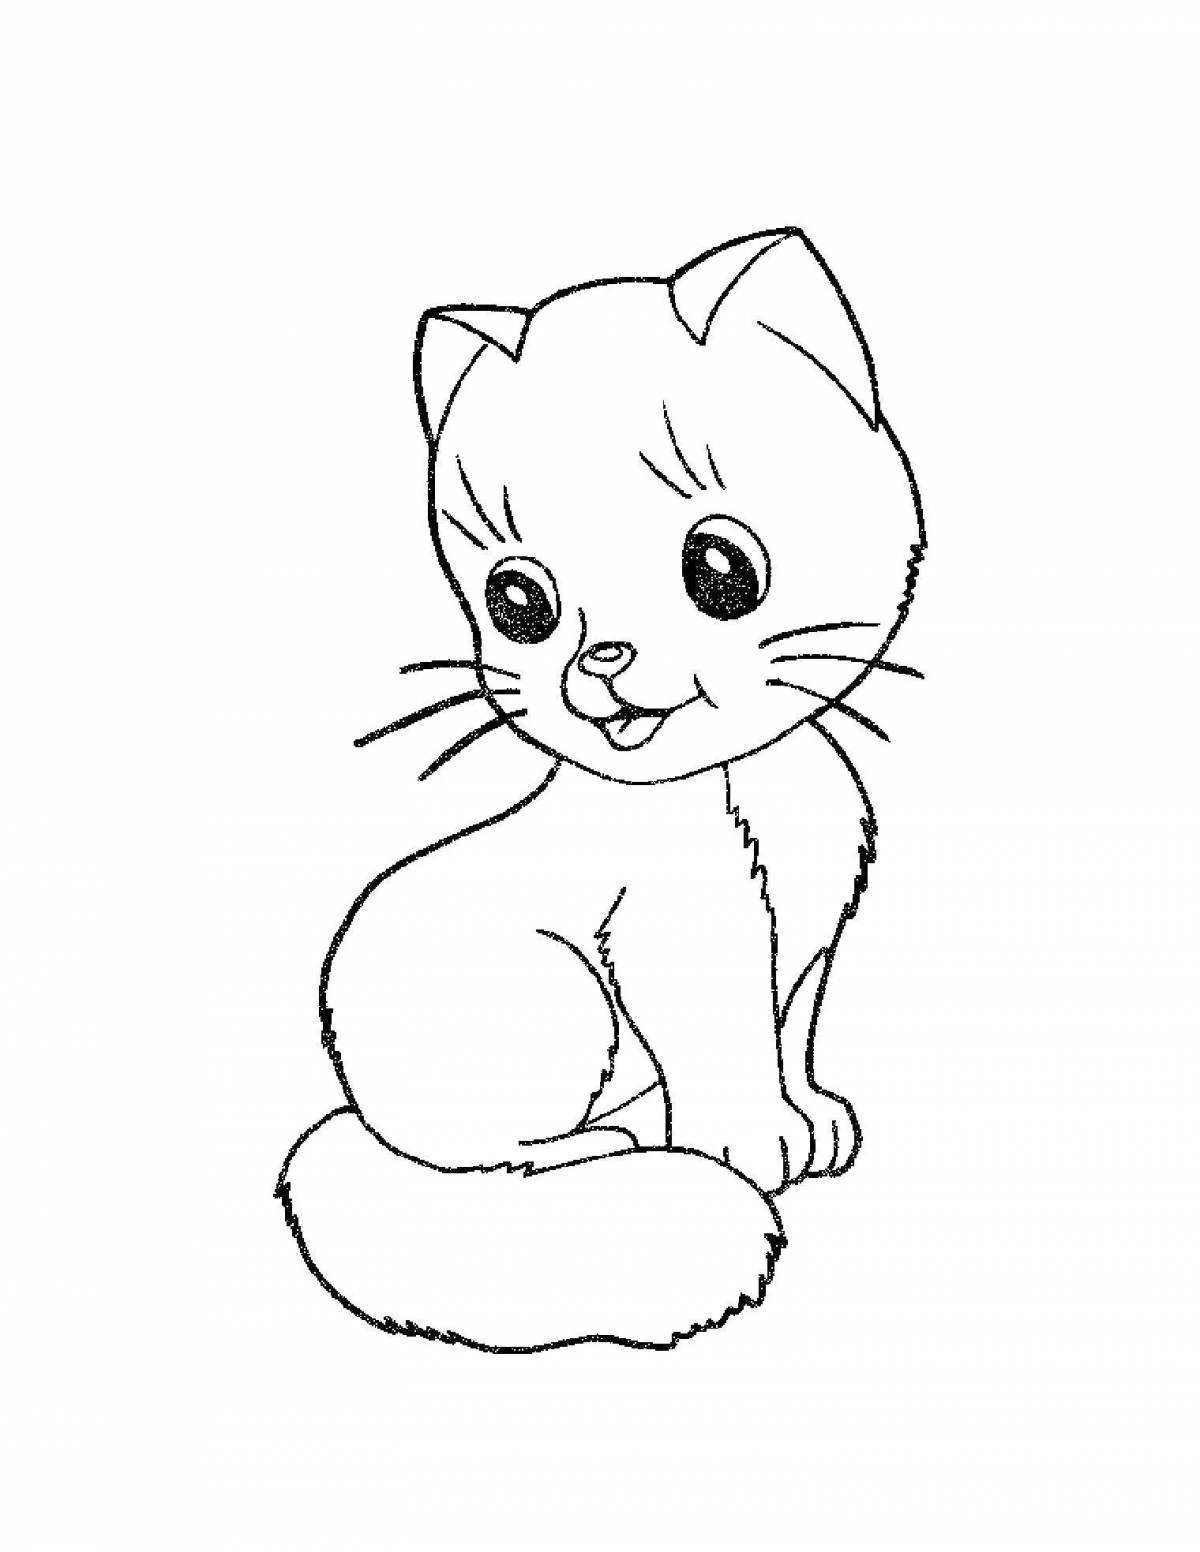 Playful drawing of a cat